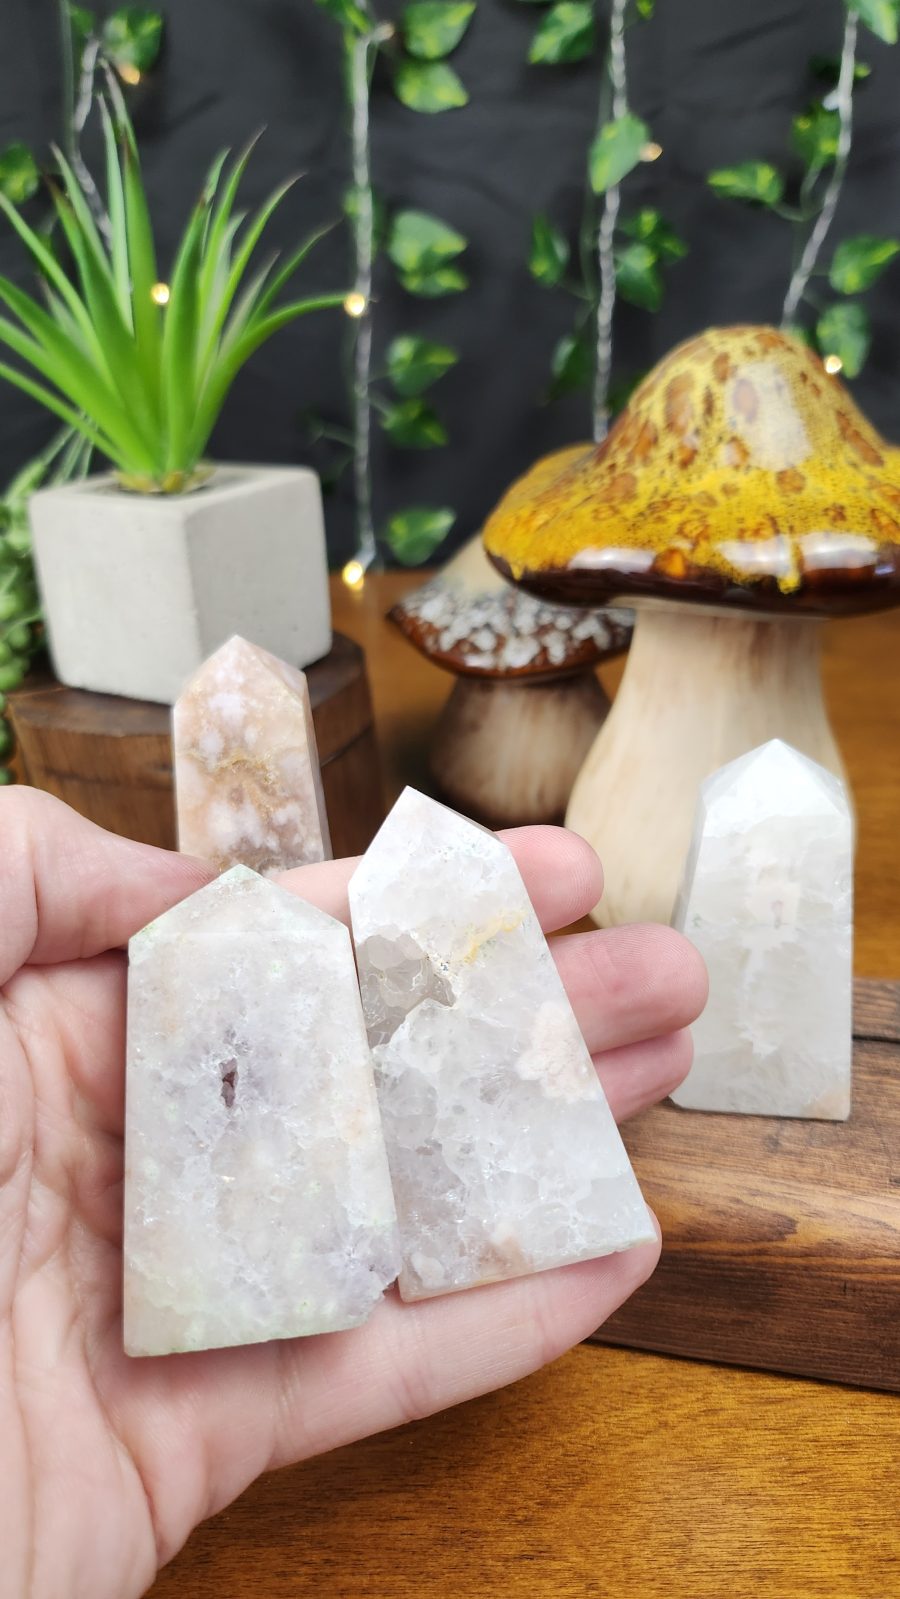 Pink Amethyst with Flower Agate Crystal Towers shown in hand for scale.